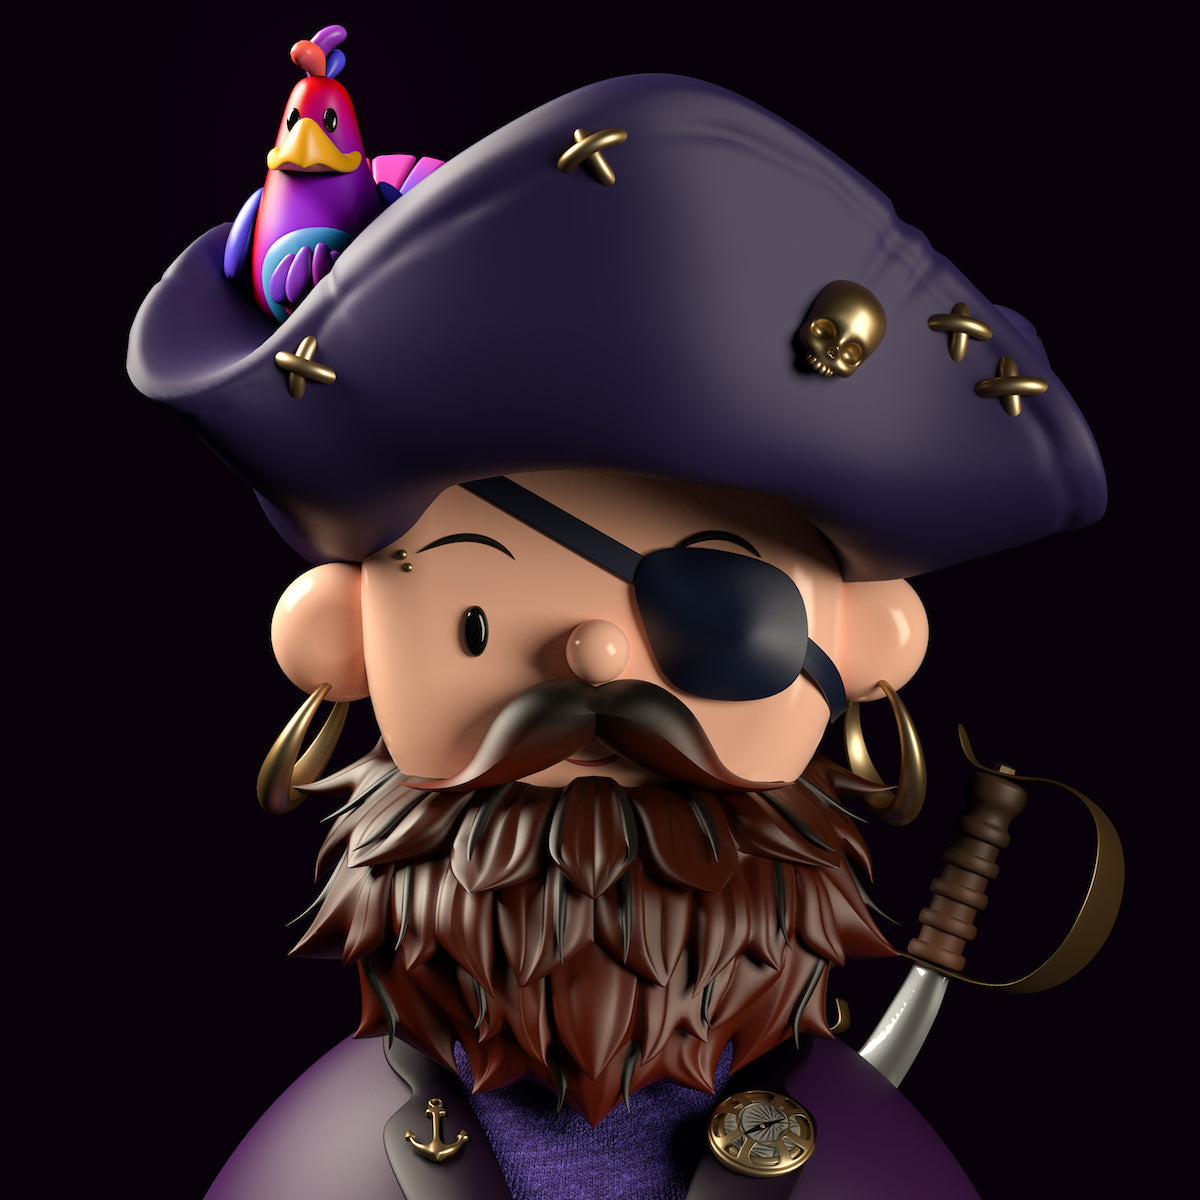 Pirate Toy Face  by Amrit Pal Singh